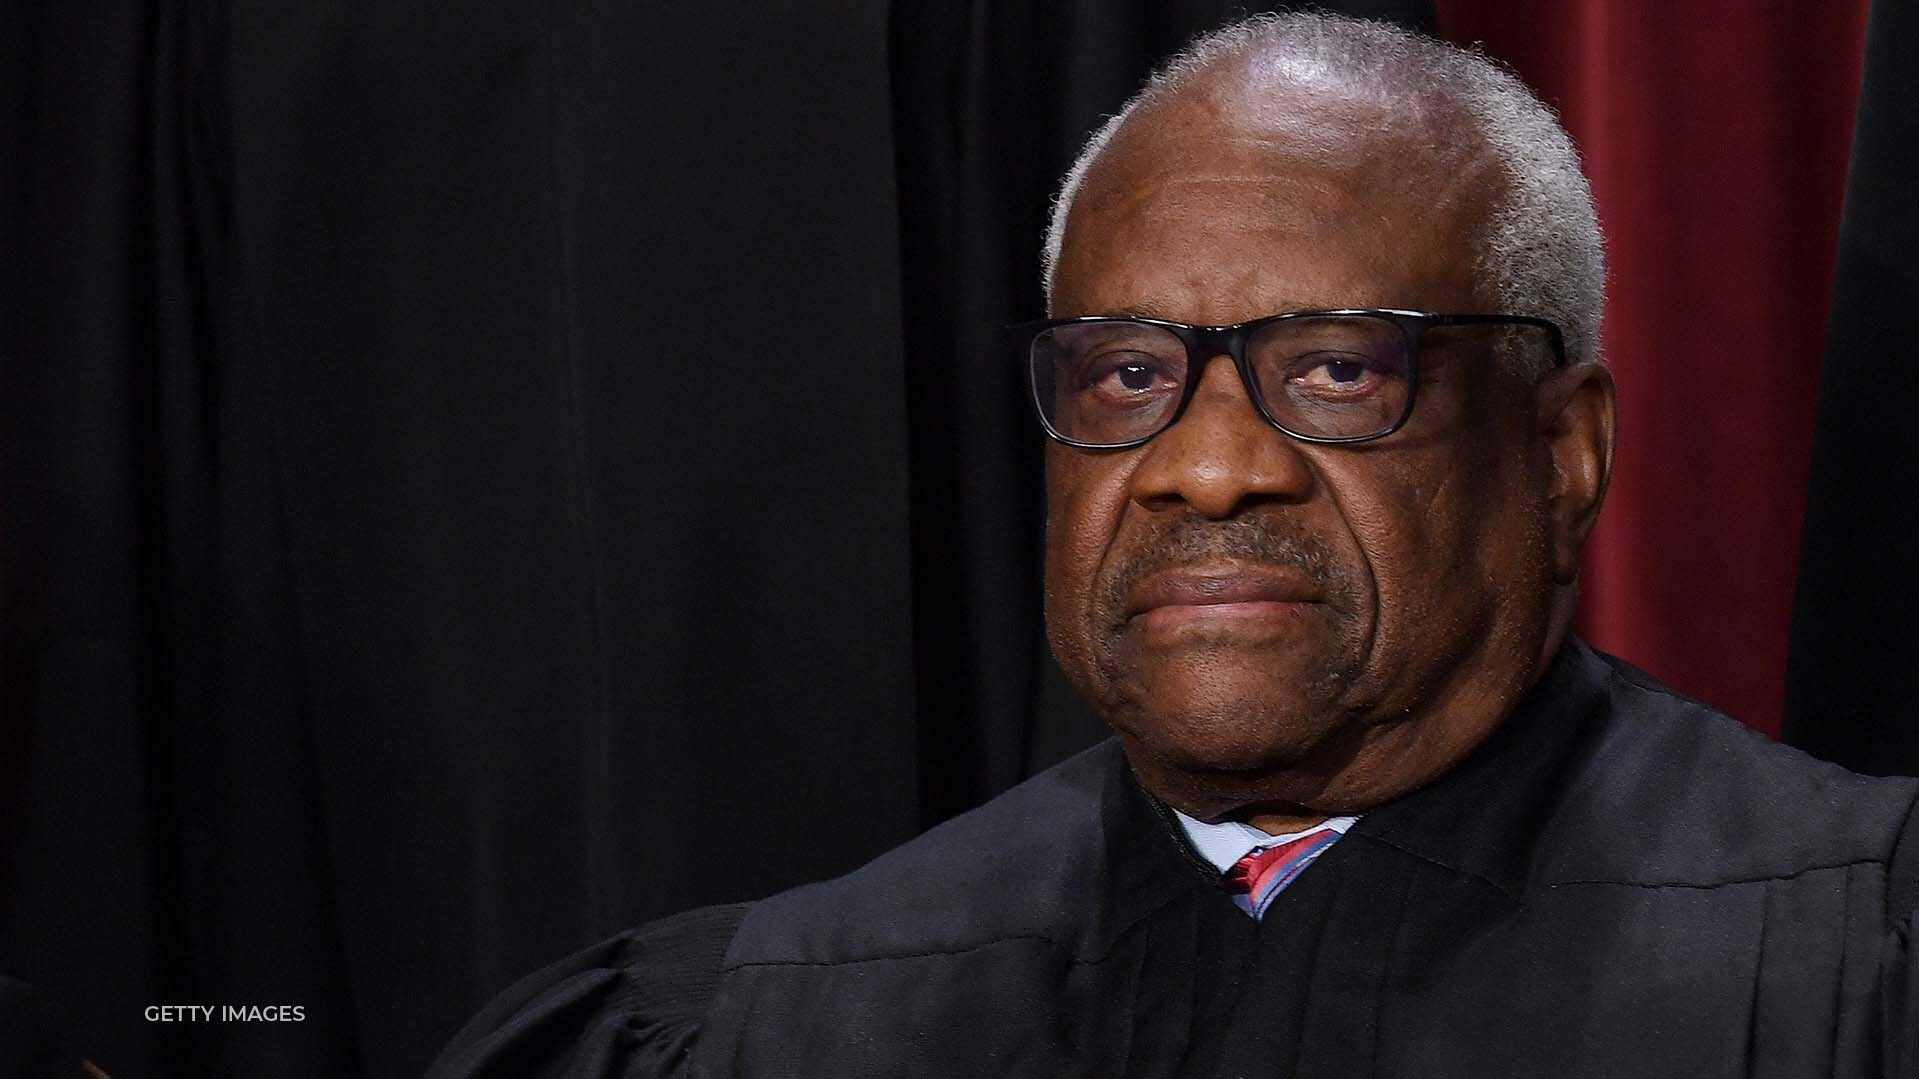 A new report from ProPublica revealed Supreme Court Justice Clarence Thomas did not disclose a 3,000 real estate sale to a GOP megadonor.